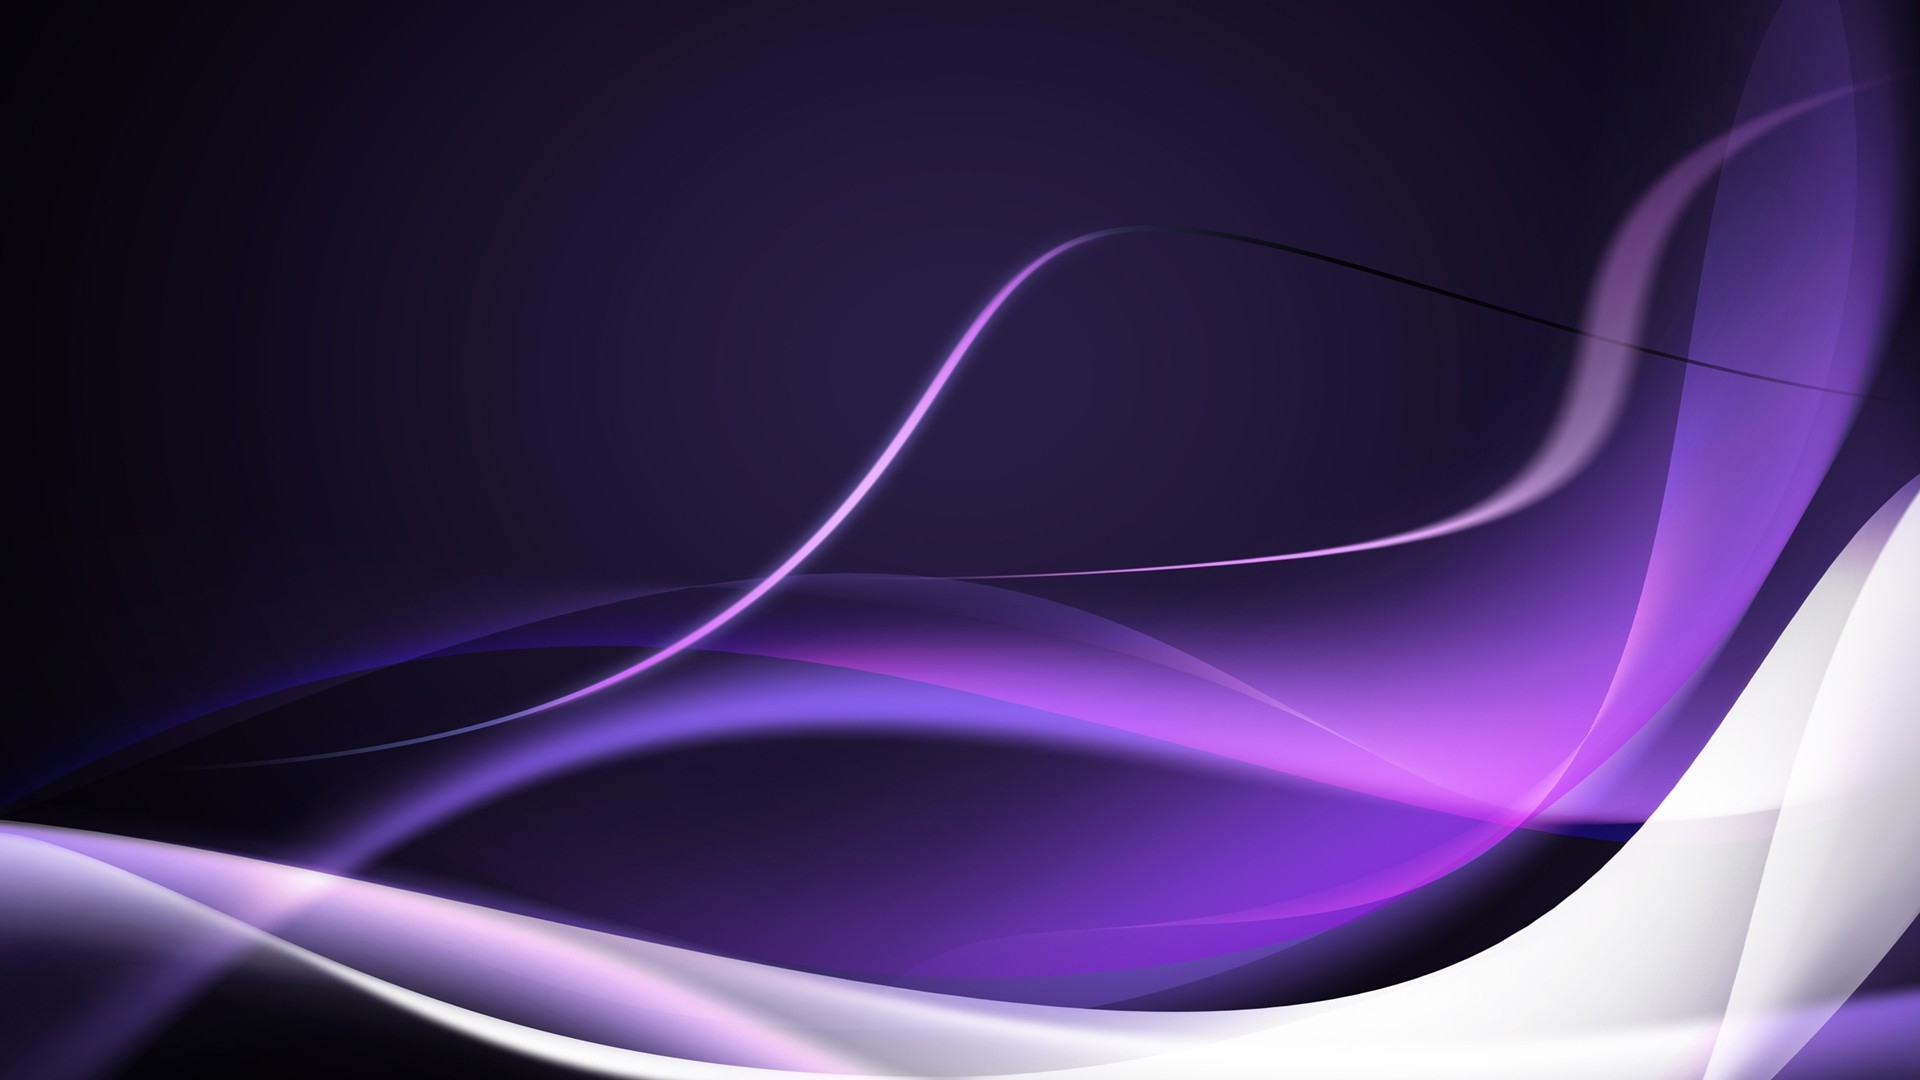 Abstract Purple and White Waves